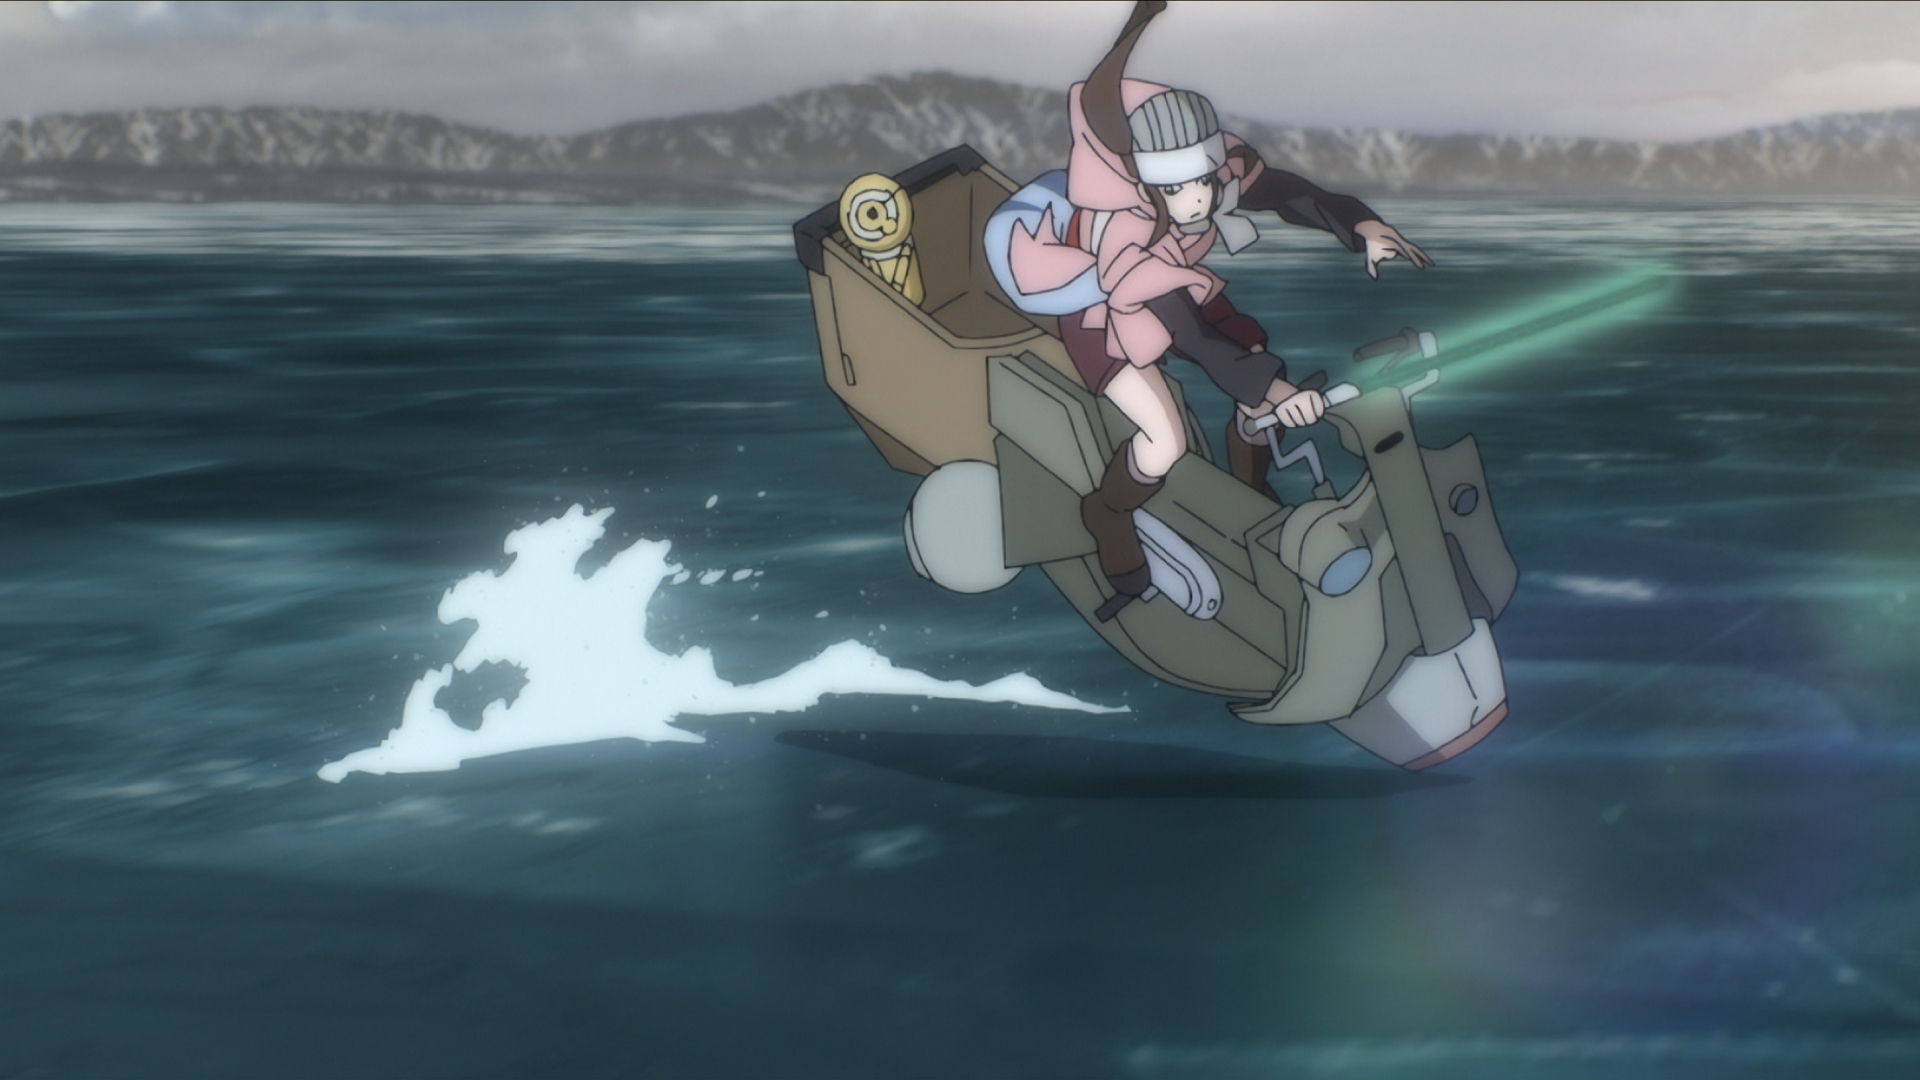 A young girl rides a speeder across a body of water in Star Wars: Visions